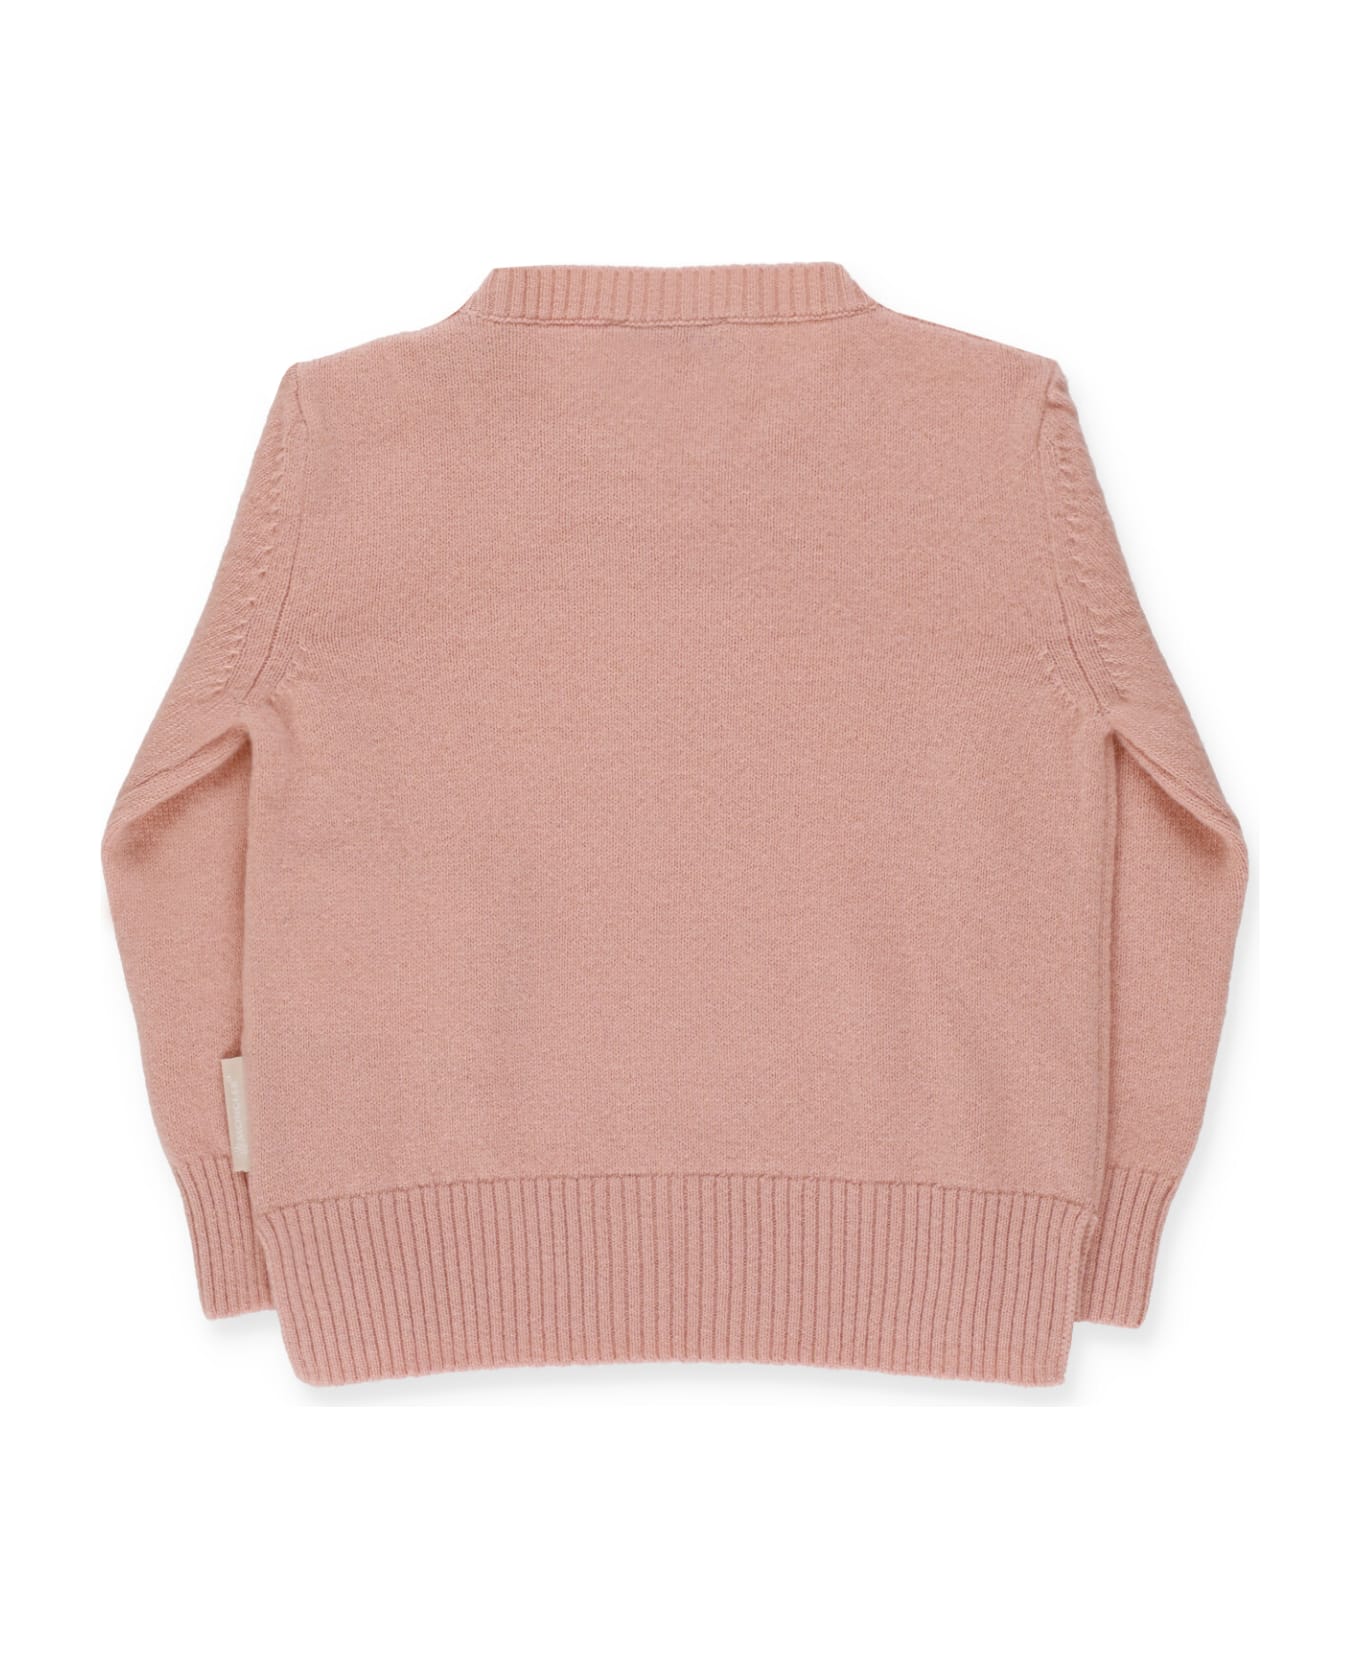 Moncler Tricot Sweater - PINK